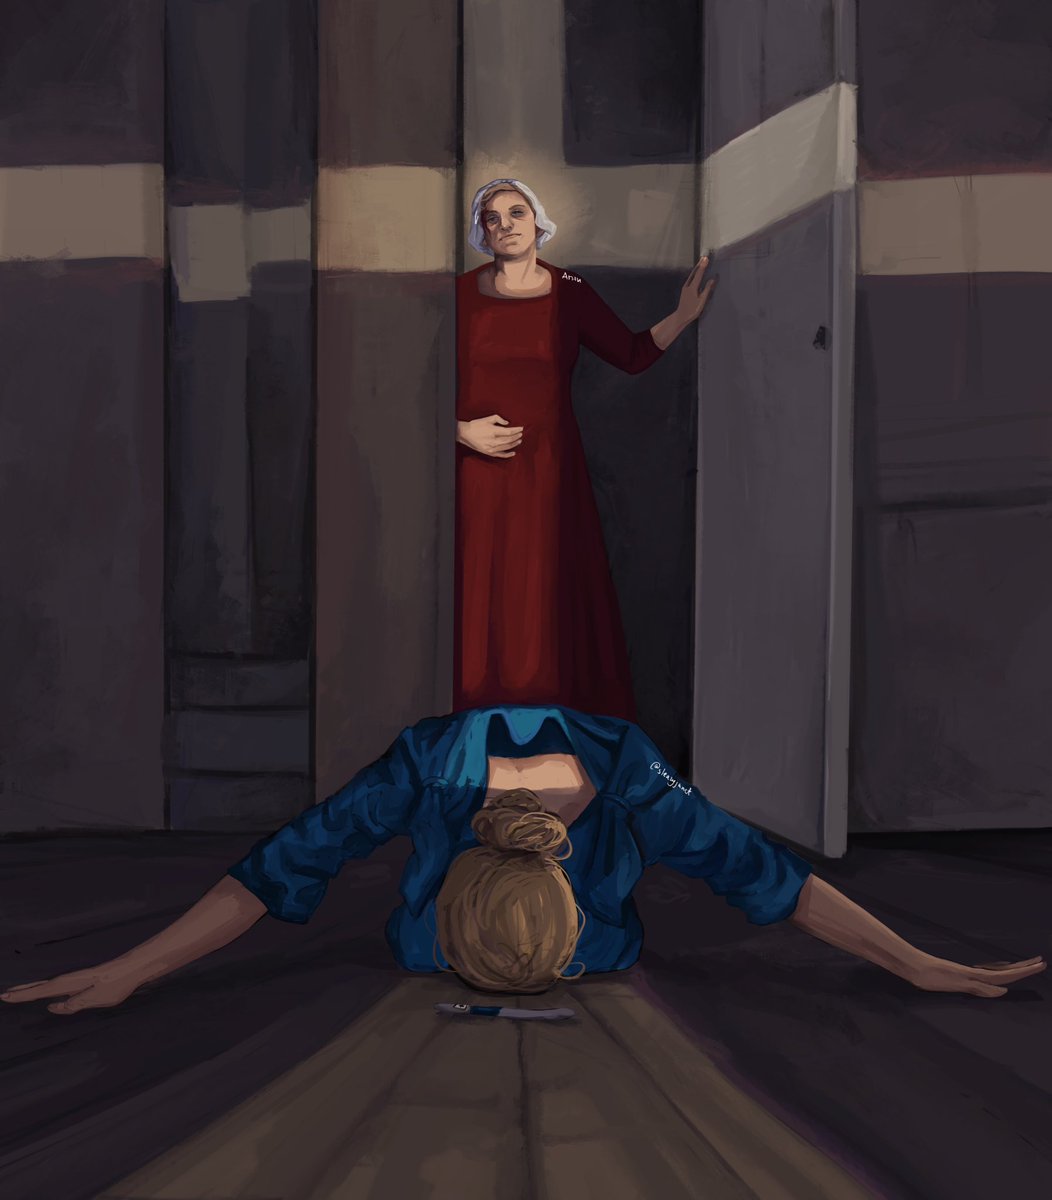 pray to god with my arms open (if this is it, then i feel hopeless)

#thehandmaidstale #art